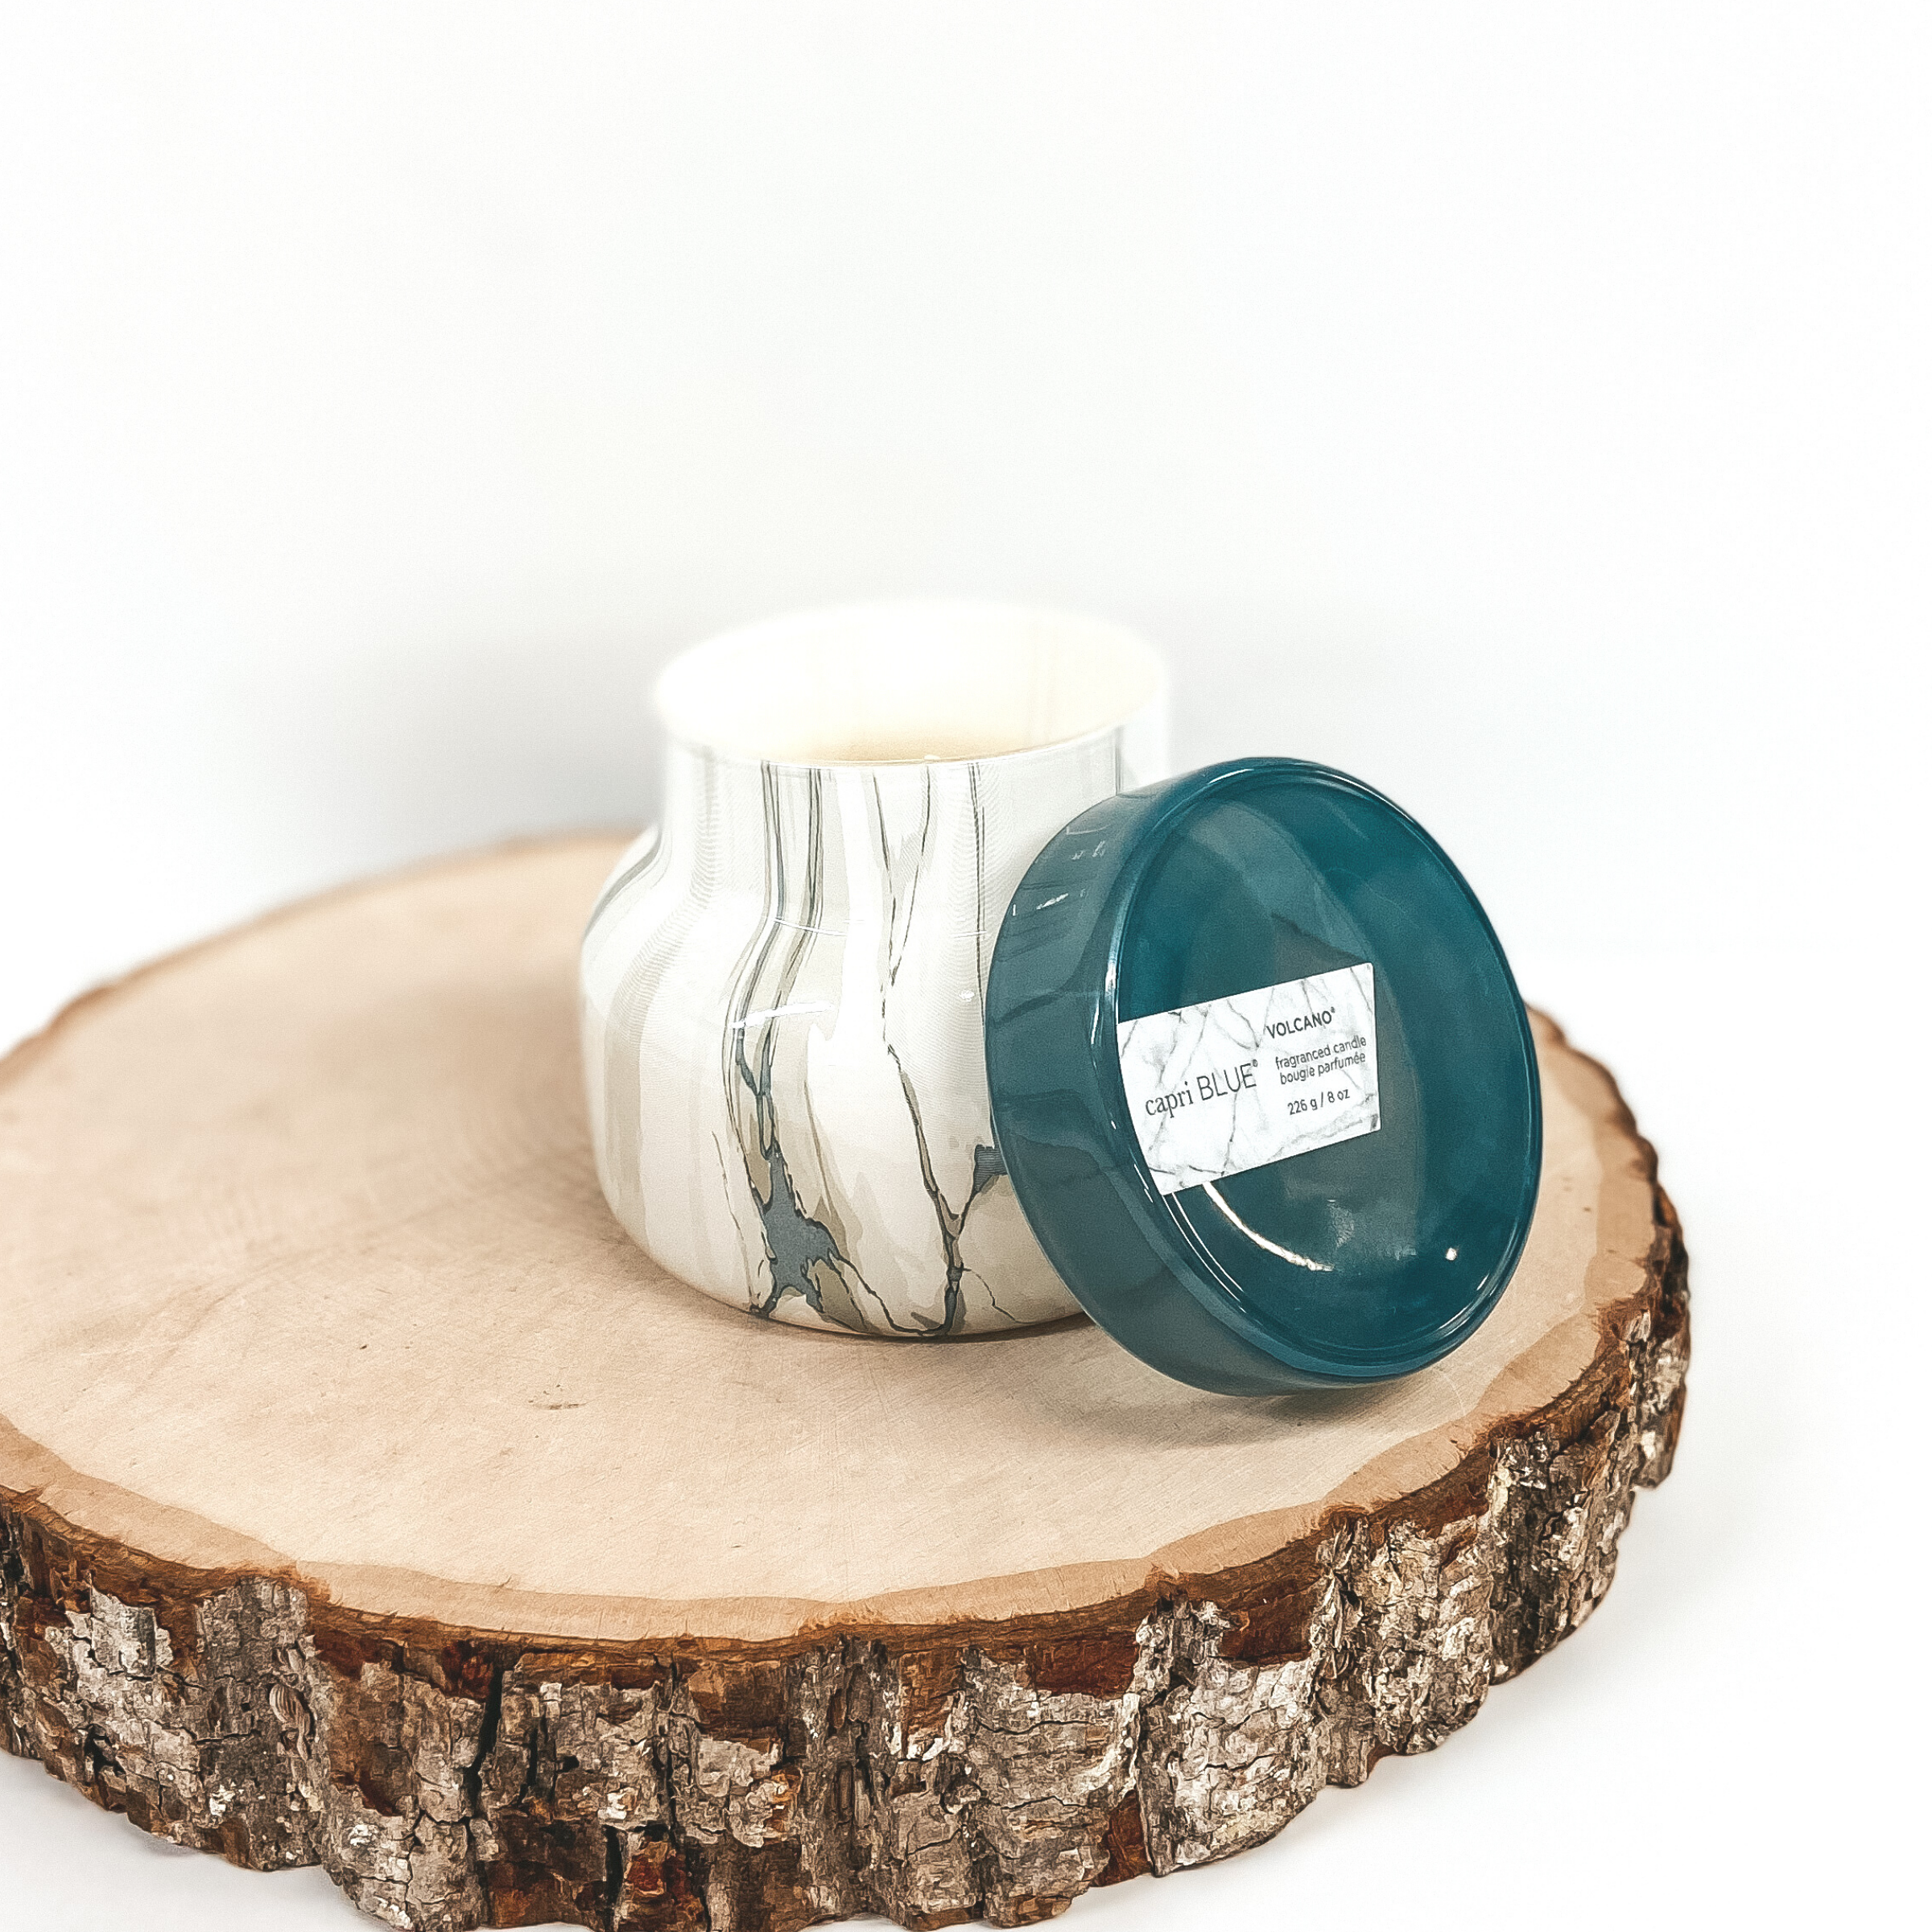 An ivory and blue marble candle with a blue lid pictured on wooden display.